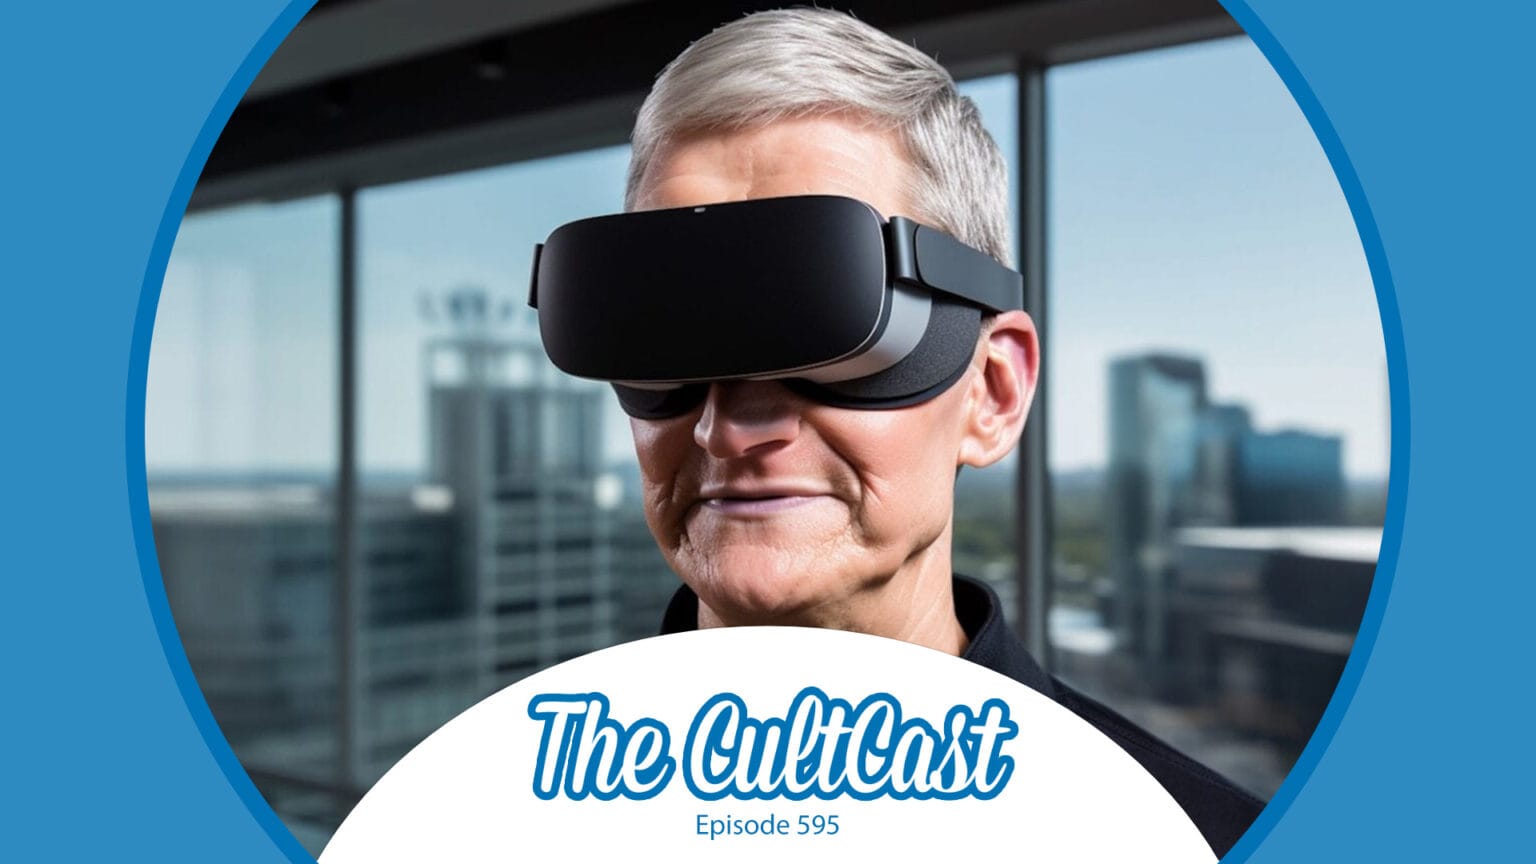 CultCast 595: AI-generated image of Apple CEO Tim Cook wearing an AR/VR headset, along with the CultCast logo.